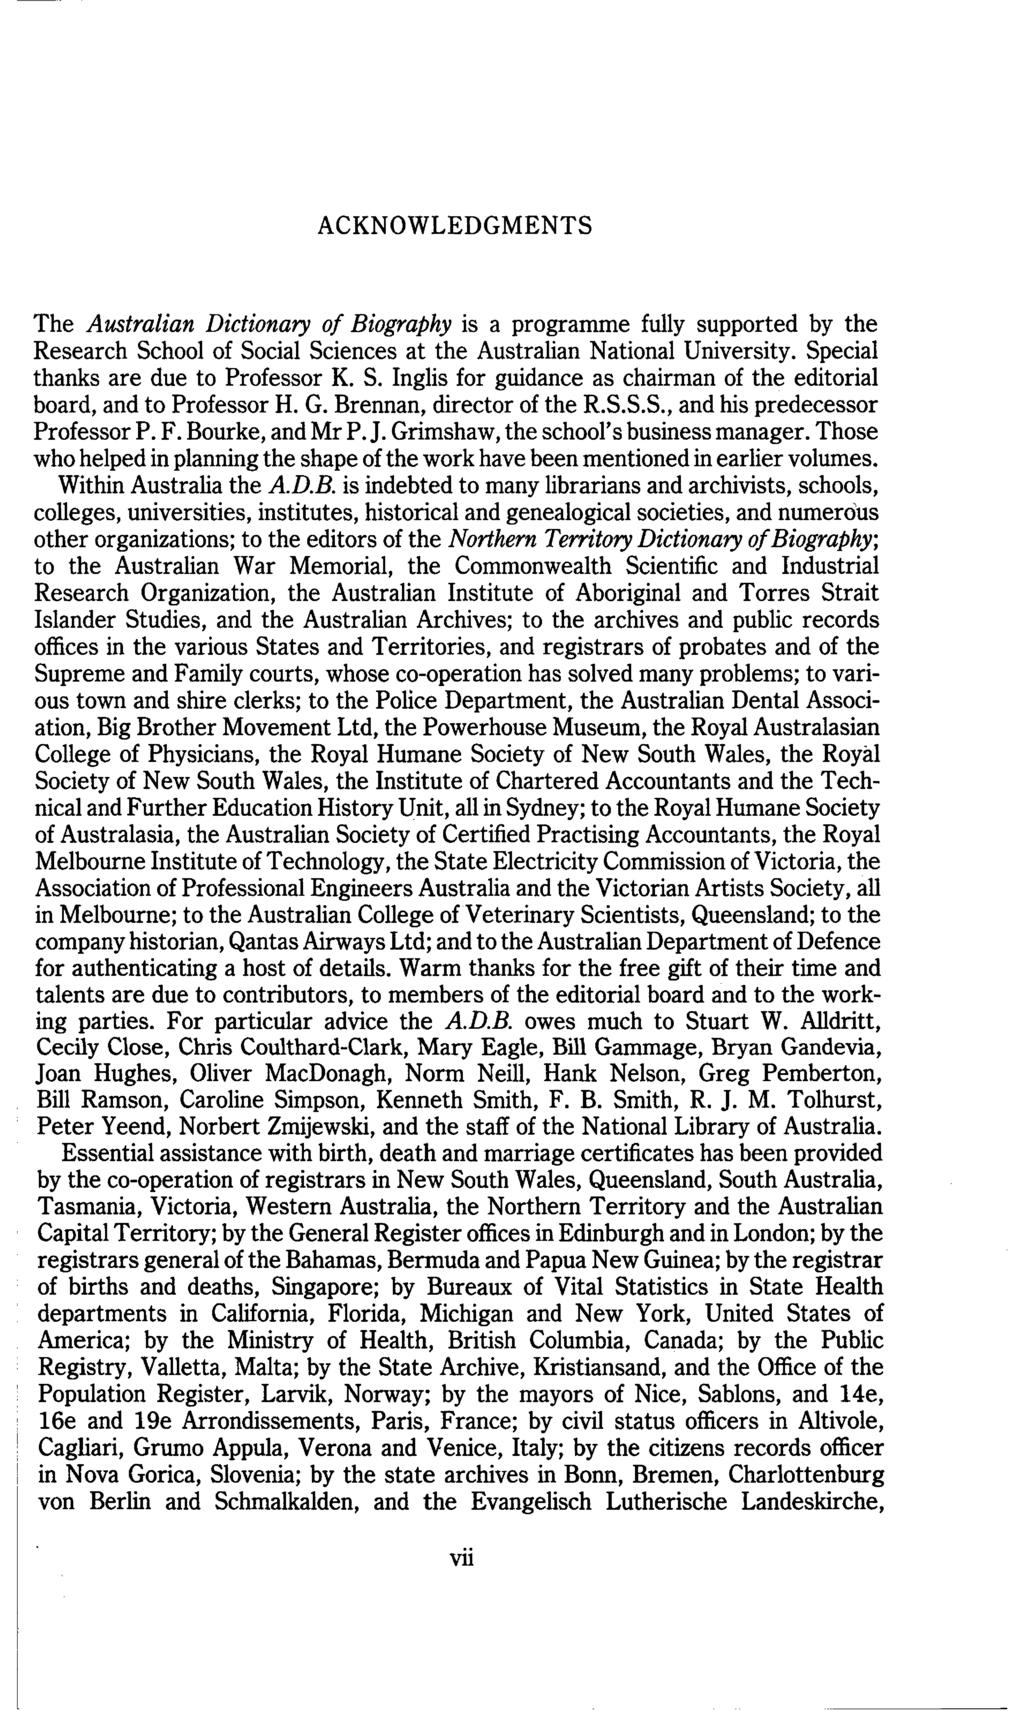 ACKNOWLEDGMENTS The Australian Dictionary of Biography is a programme fully supported by the Research School of Social Sciences at the Australian National University.